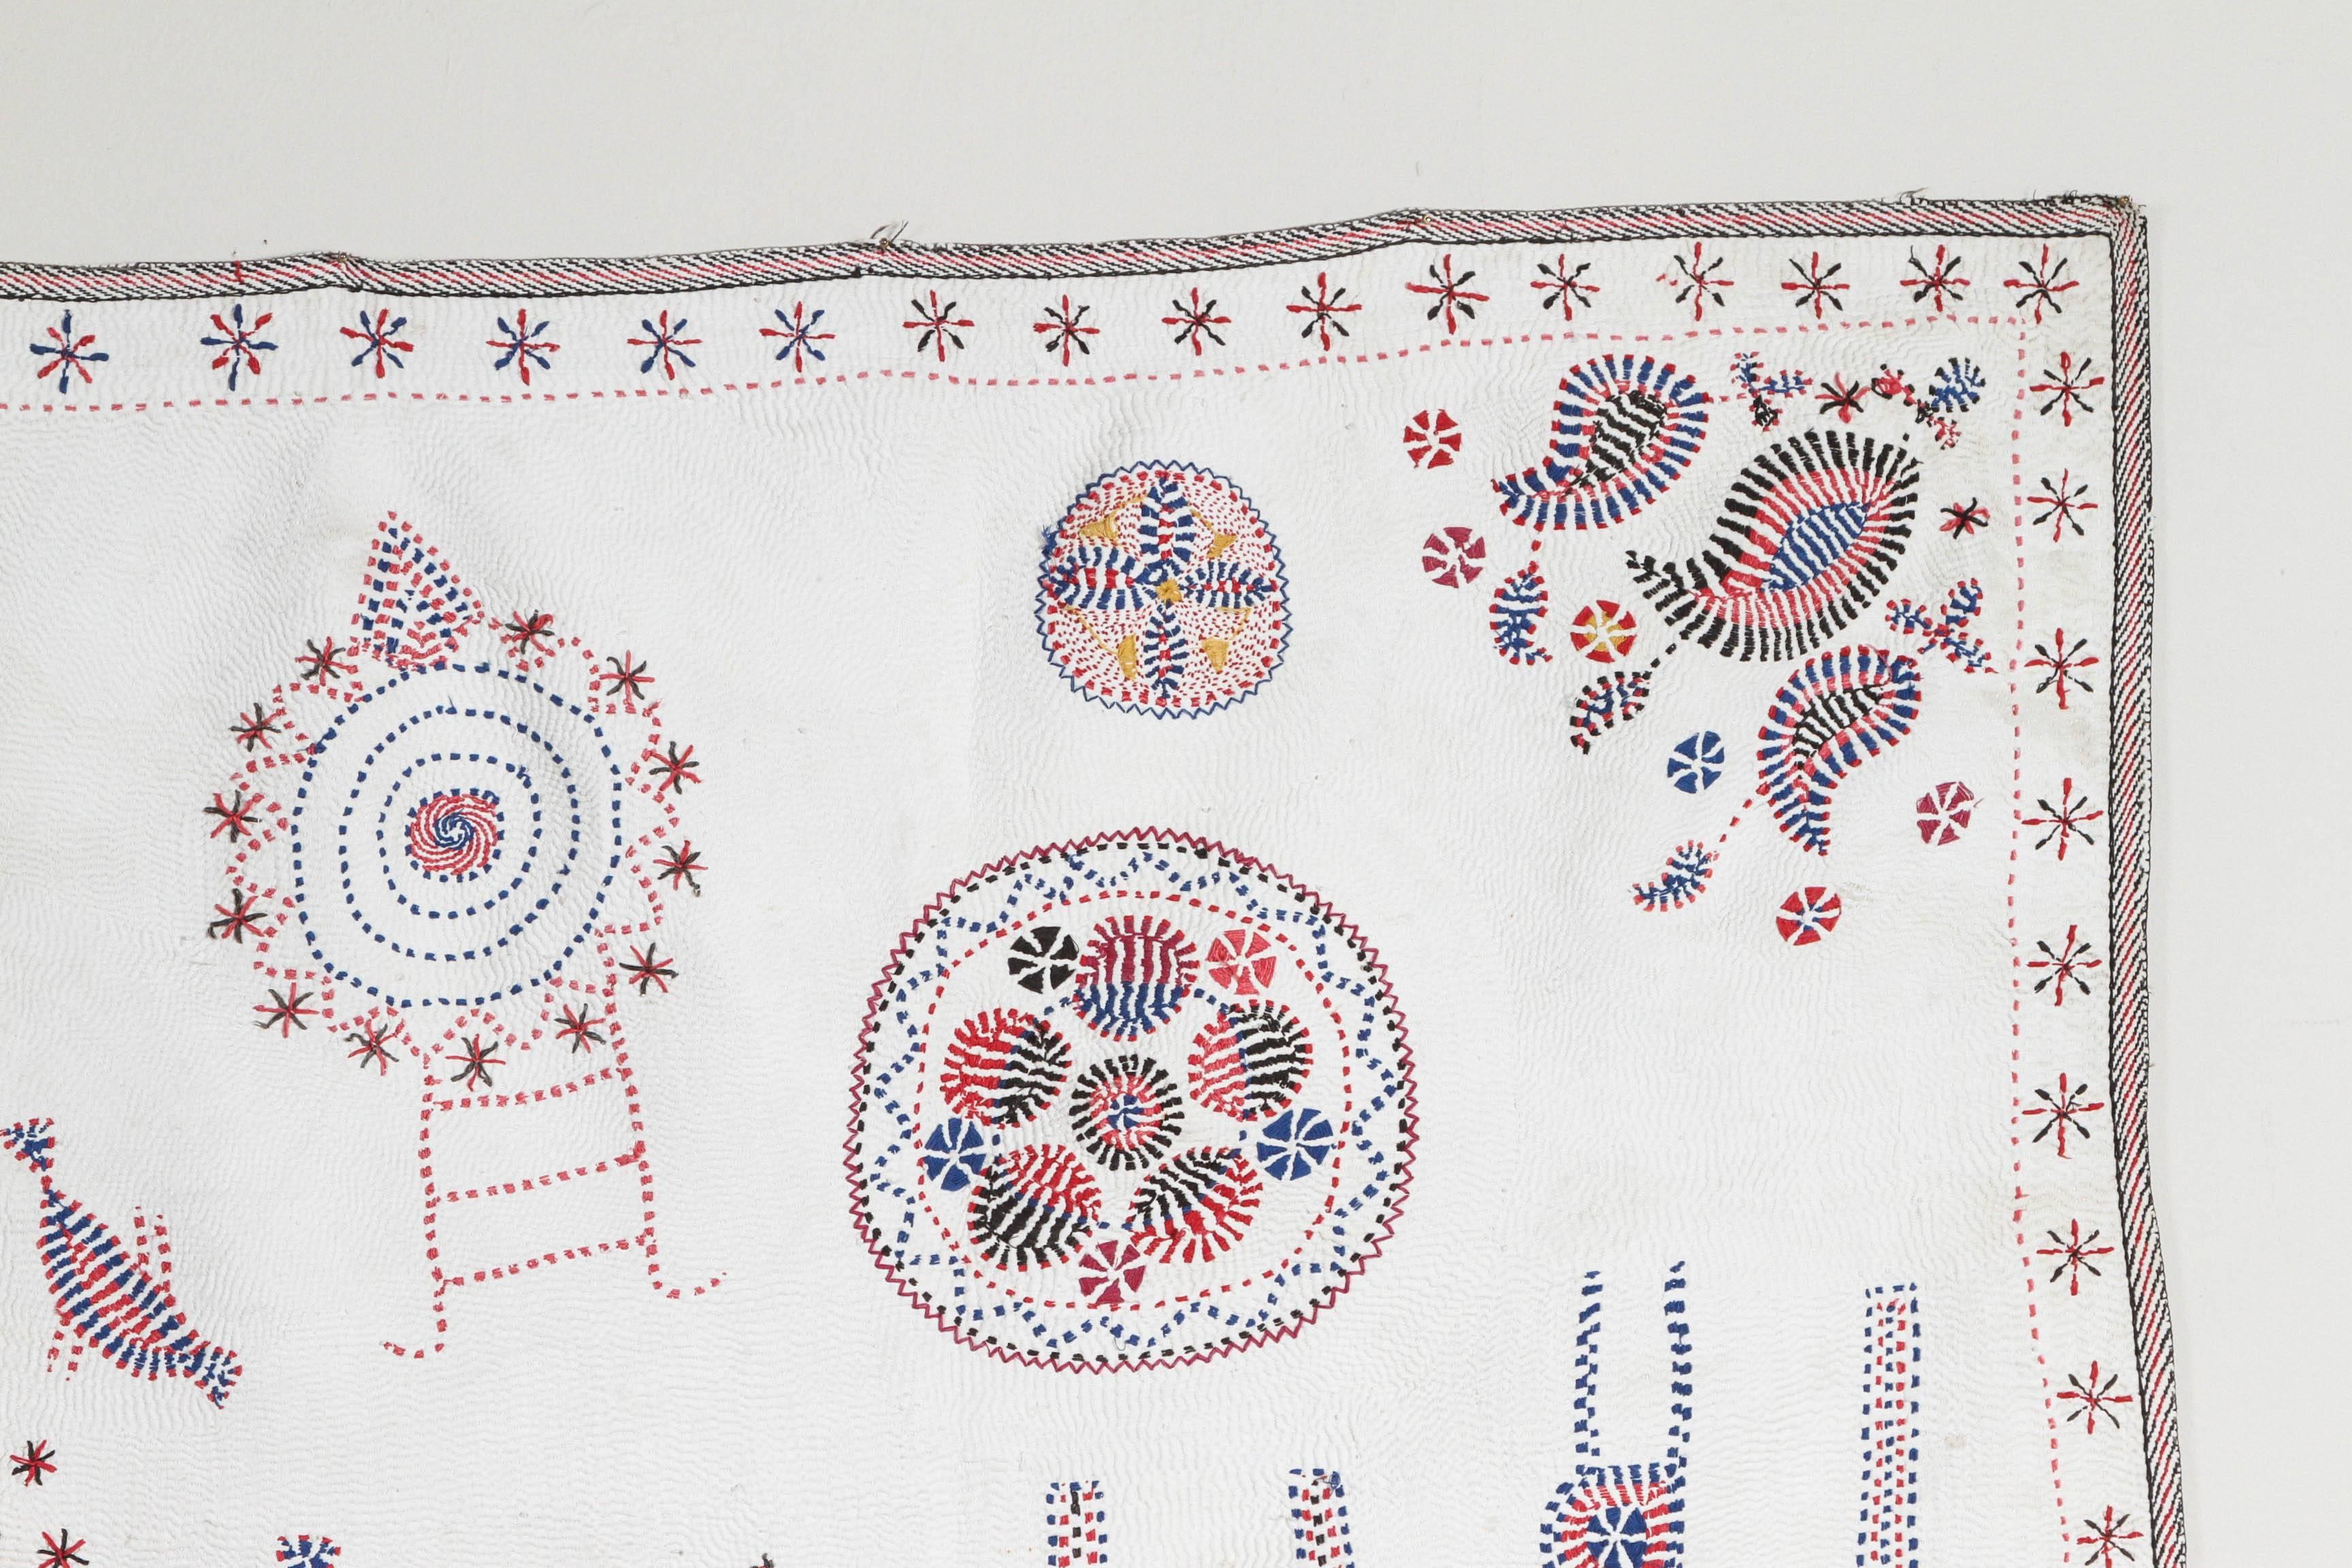 Indian Antique Bengali Kantha Quilt in Red, Blue and White